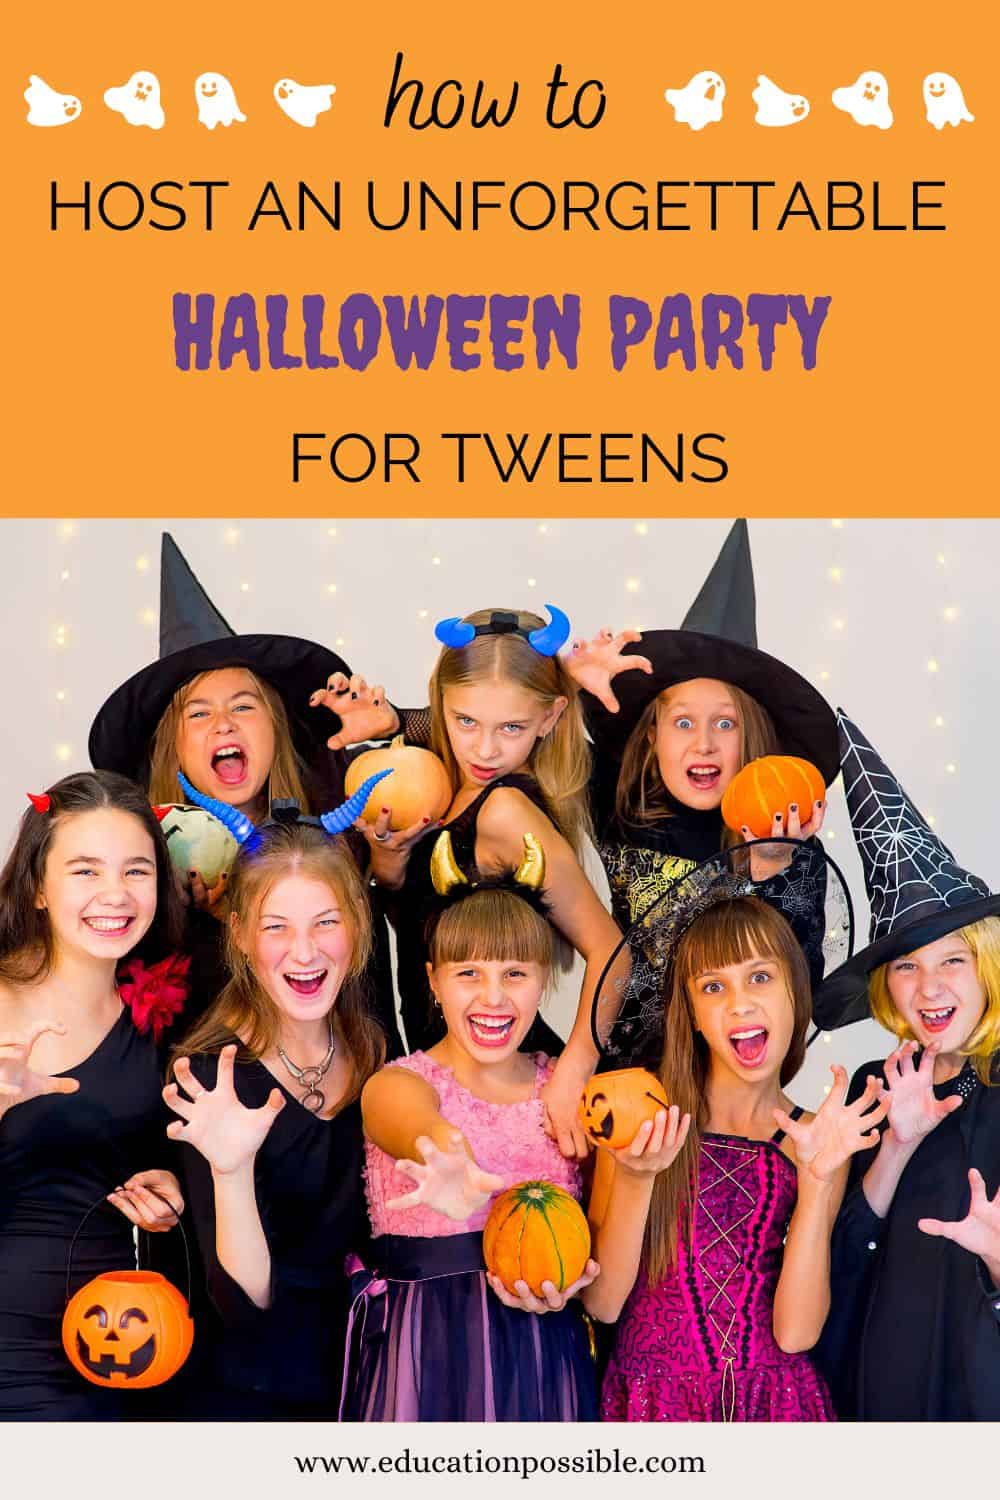 How To Host An Unforgettable Halloween Party for Tweens